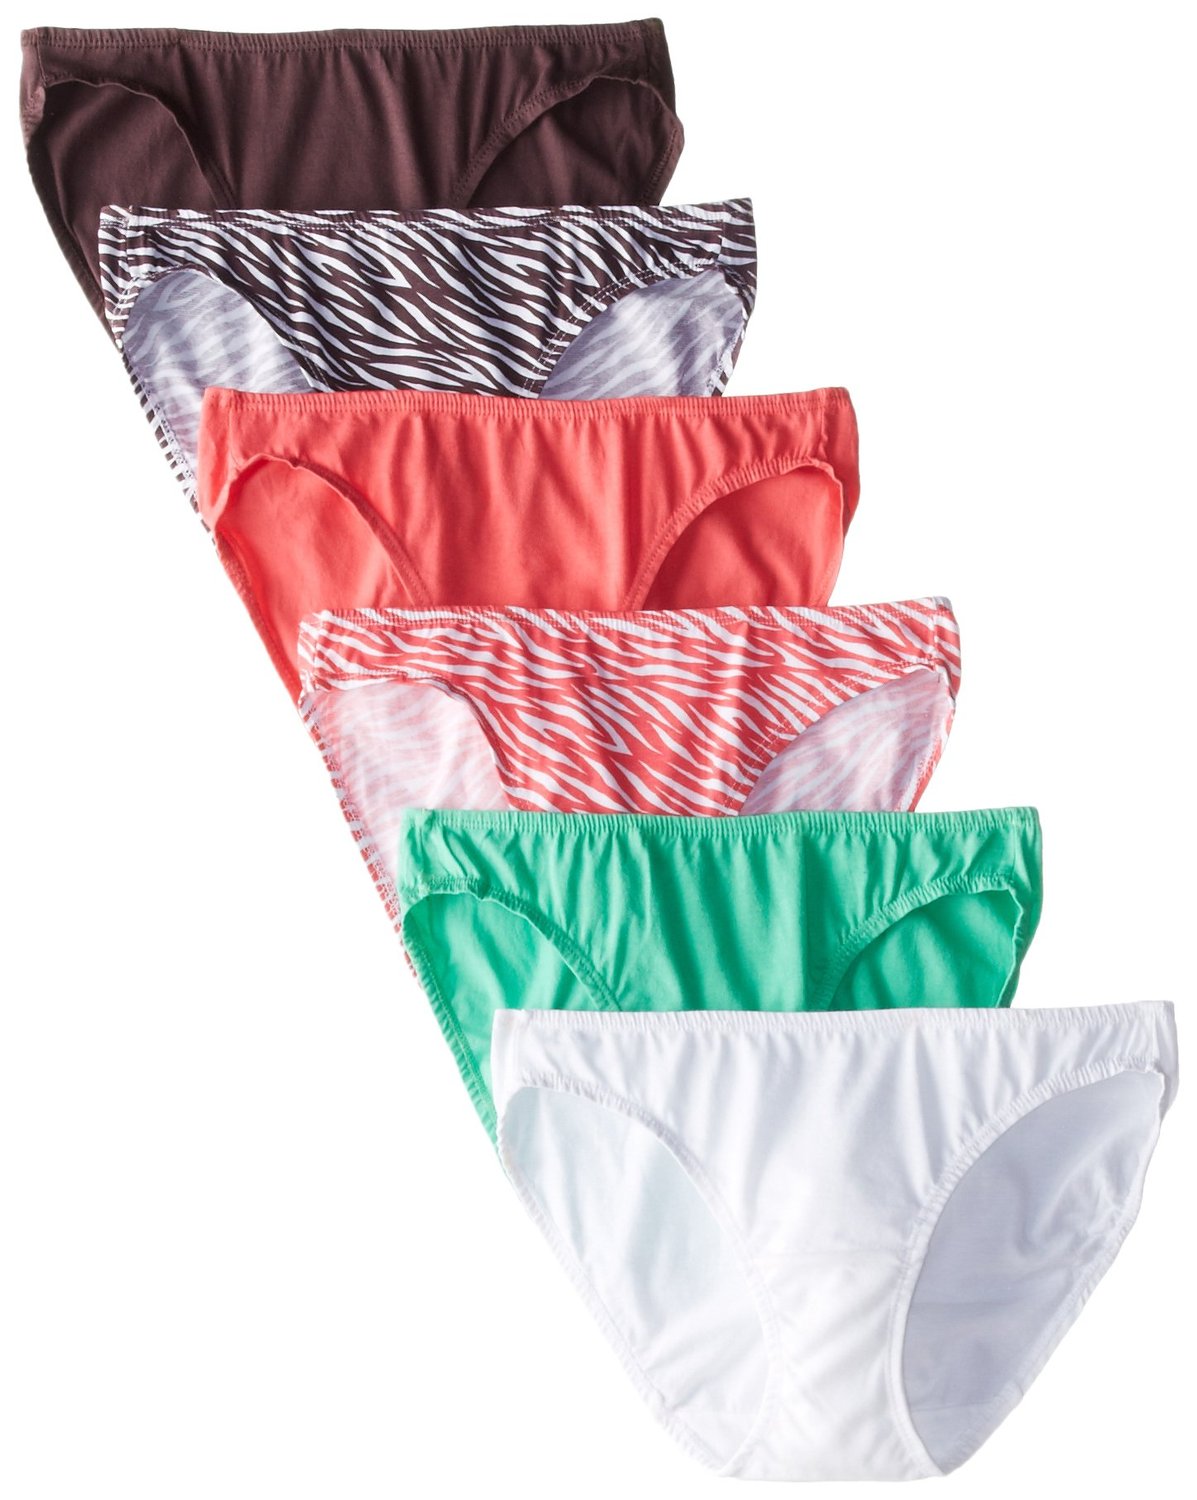 Fruit of the Loom Women's 6 Pack Cotton Brief Panties, Assorted 2, 6 at   Women's Clothing store